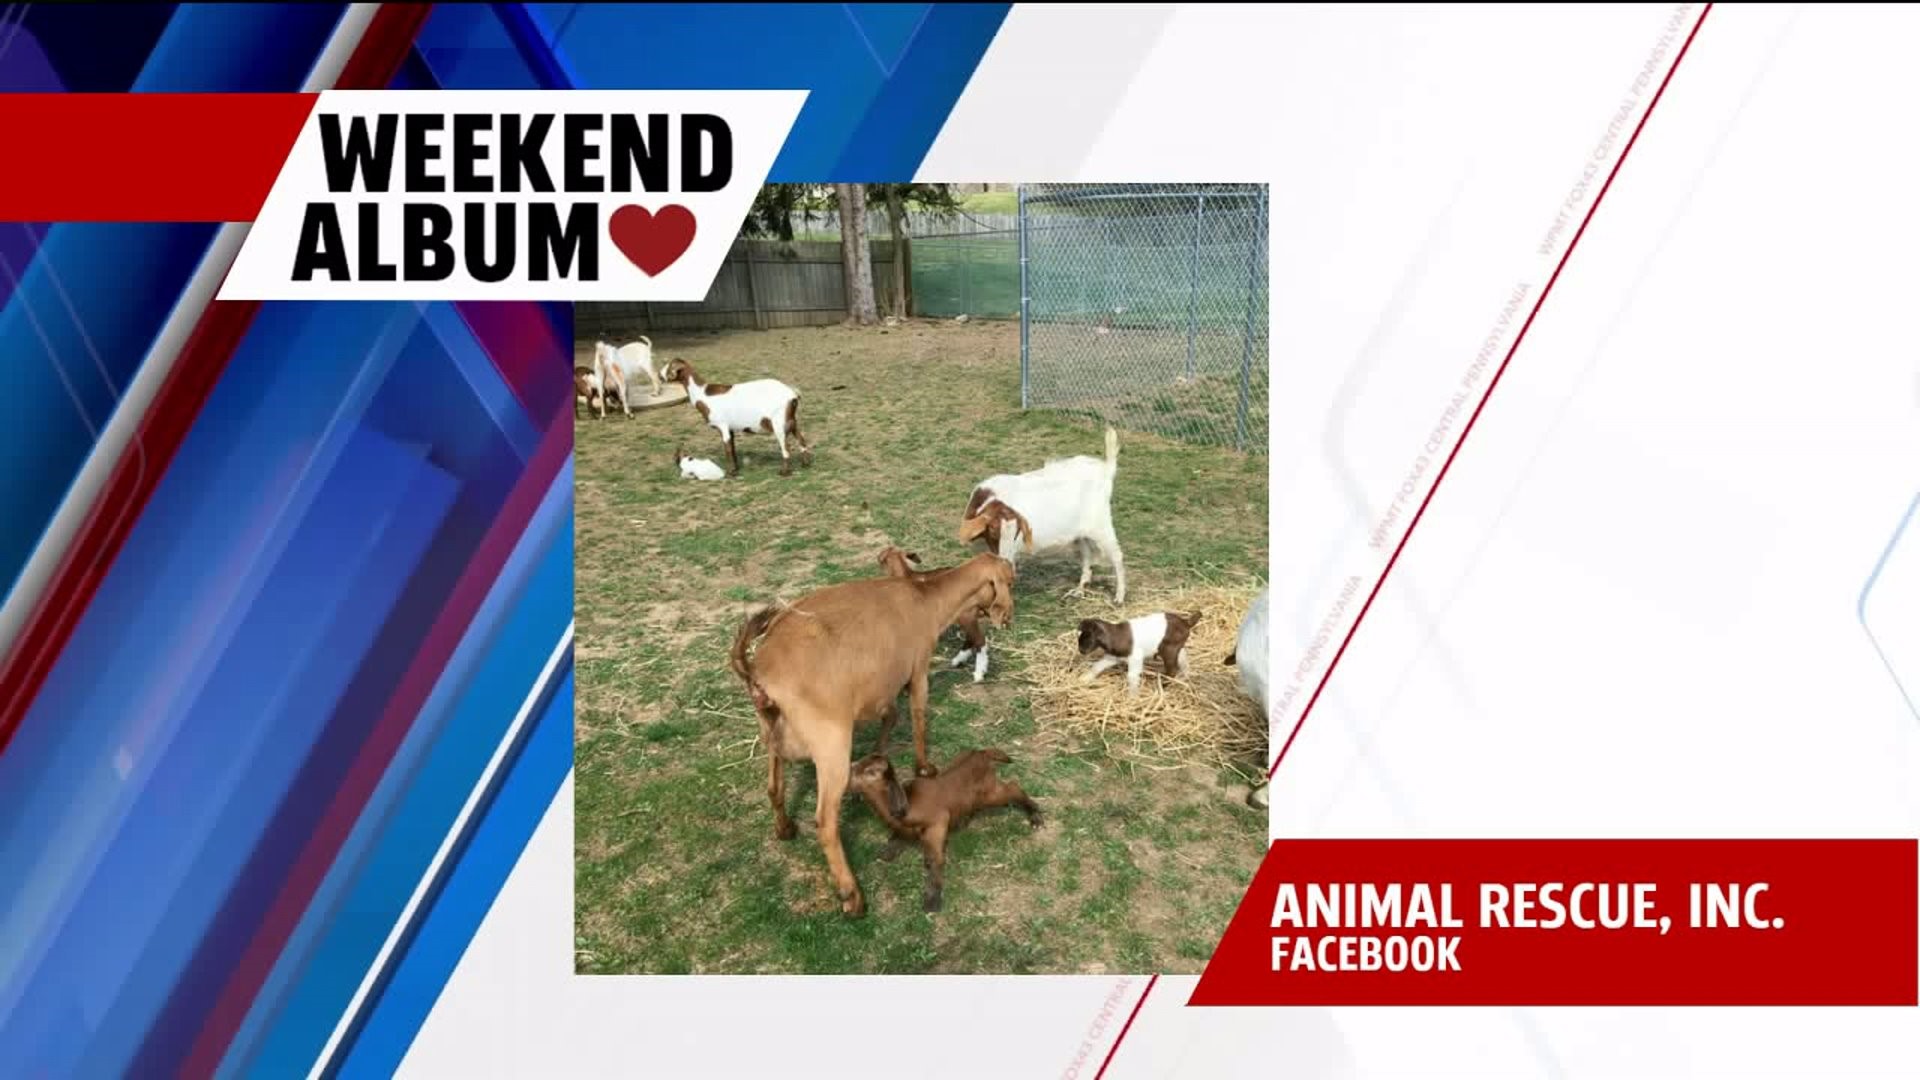 WEEKEND ALBUM: 11 baby goats born at Animal Rescue Inc.